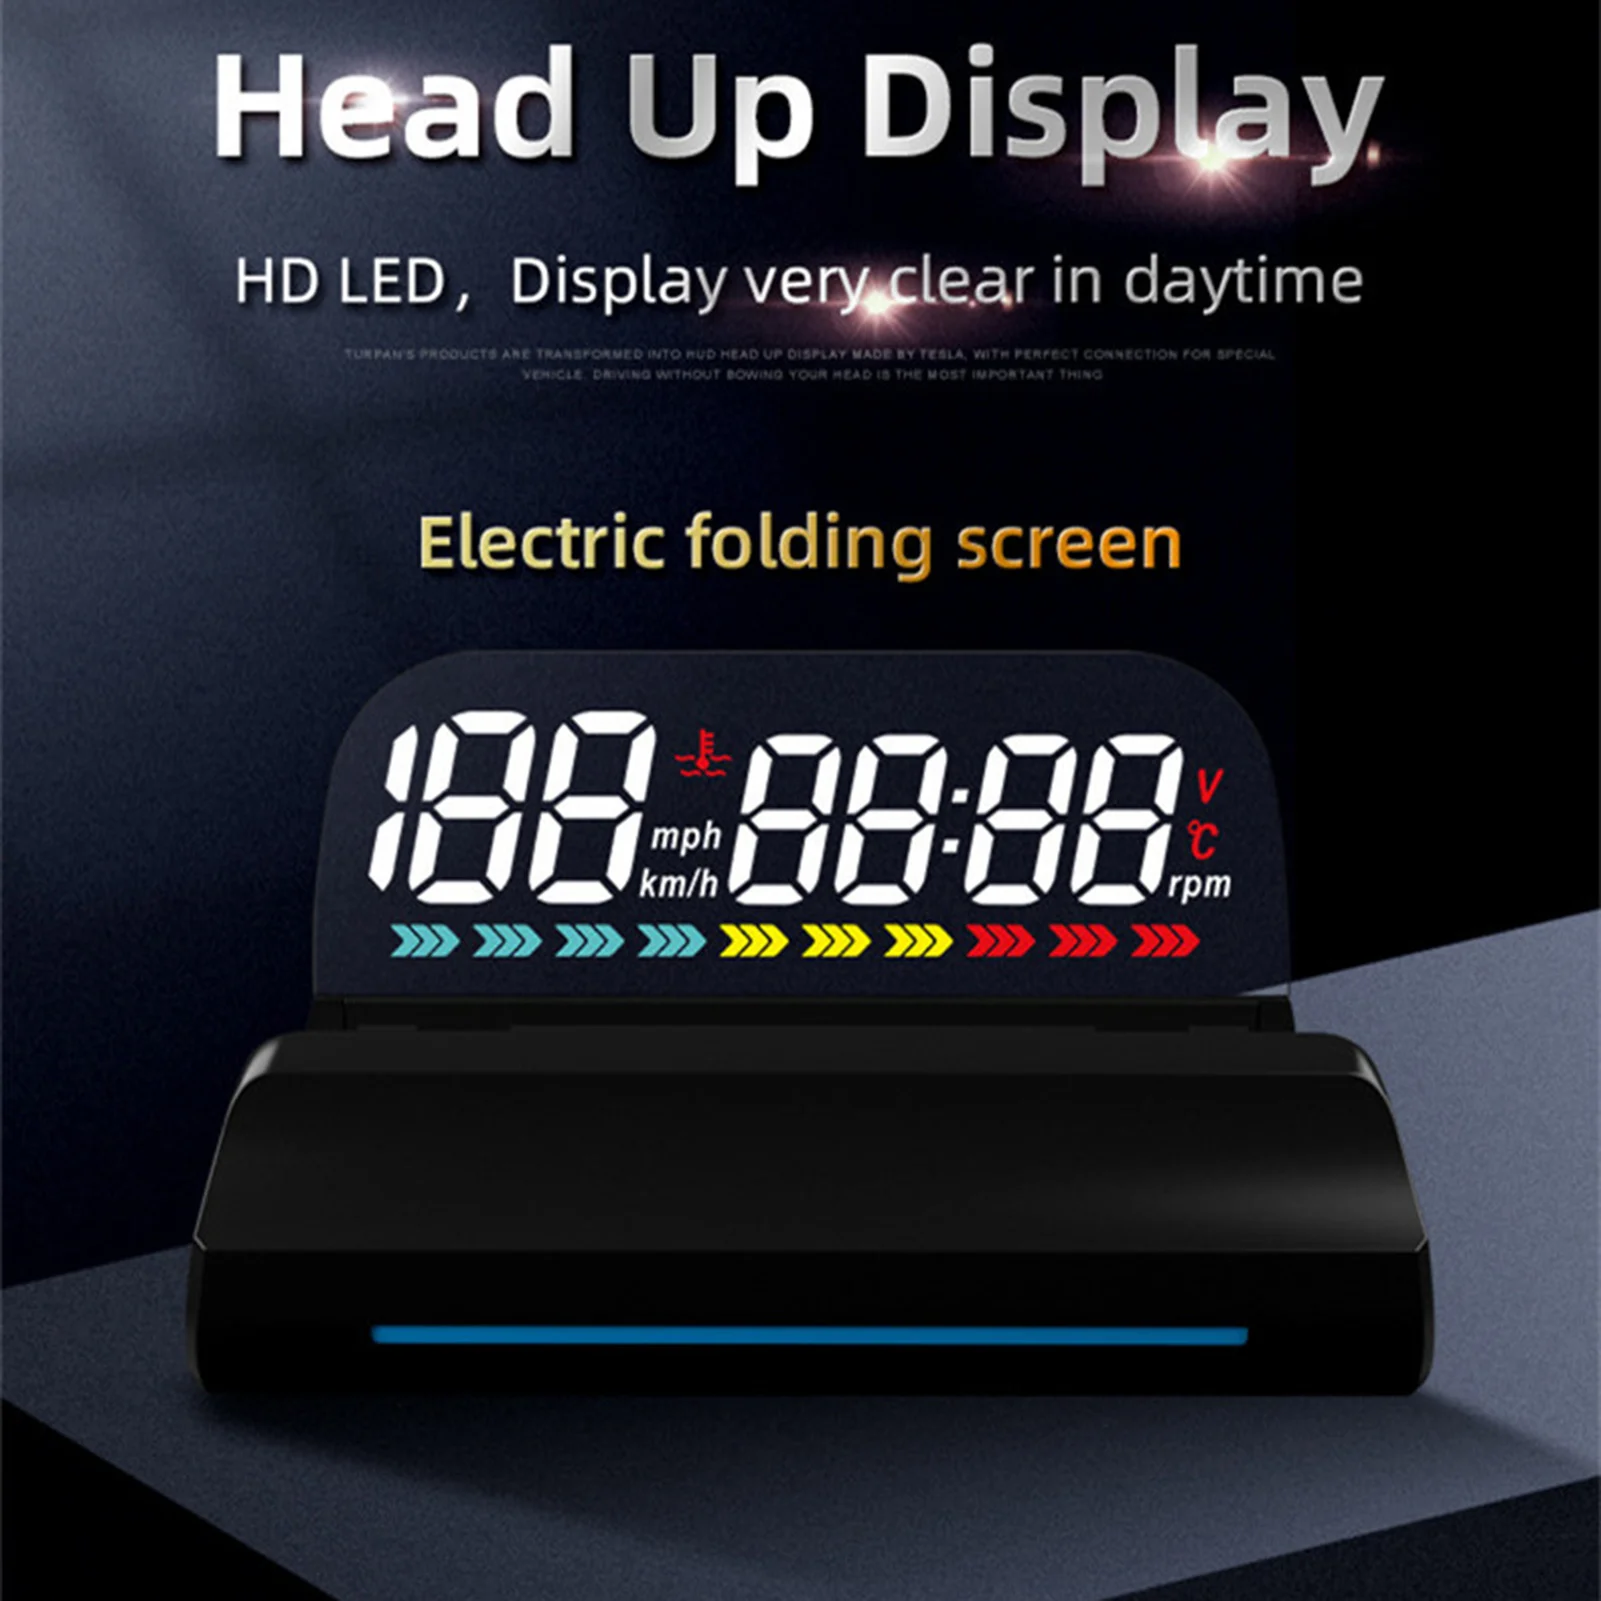 Heads Up Display OBD2 6 Modes LED Heads Up Display Very Clear In Daytime With Color Changing Light Low Power Consumption Head-up